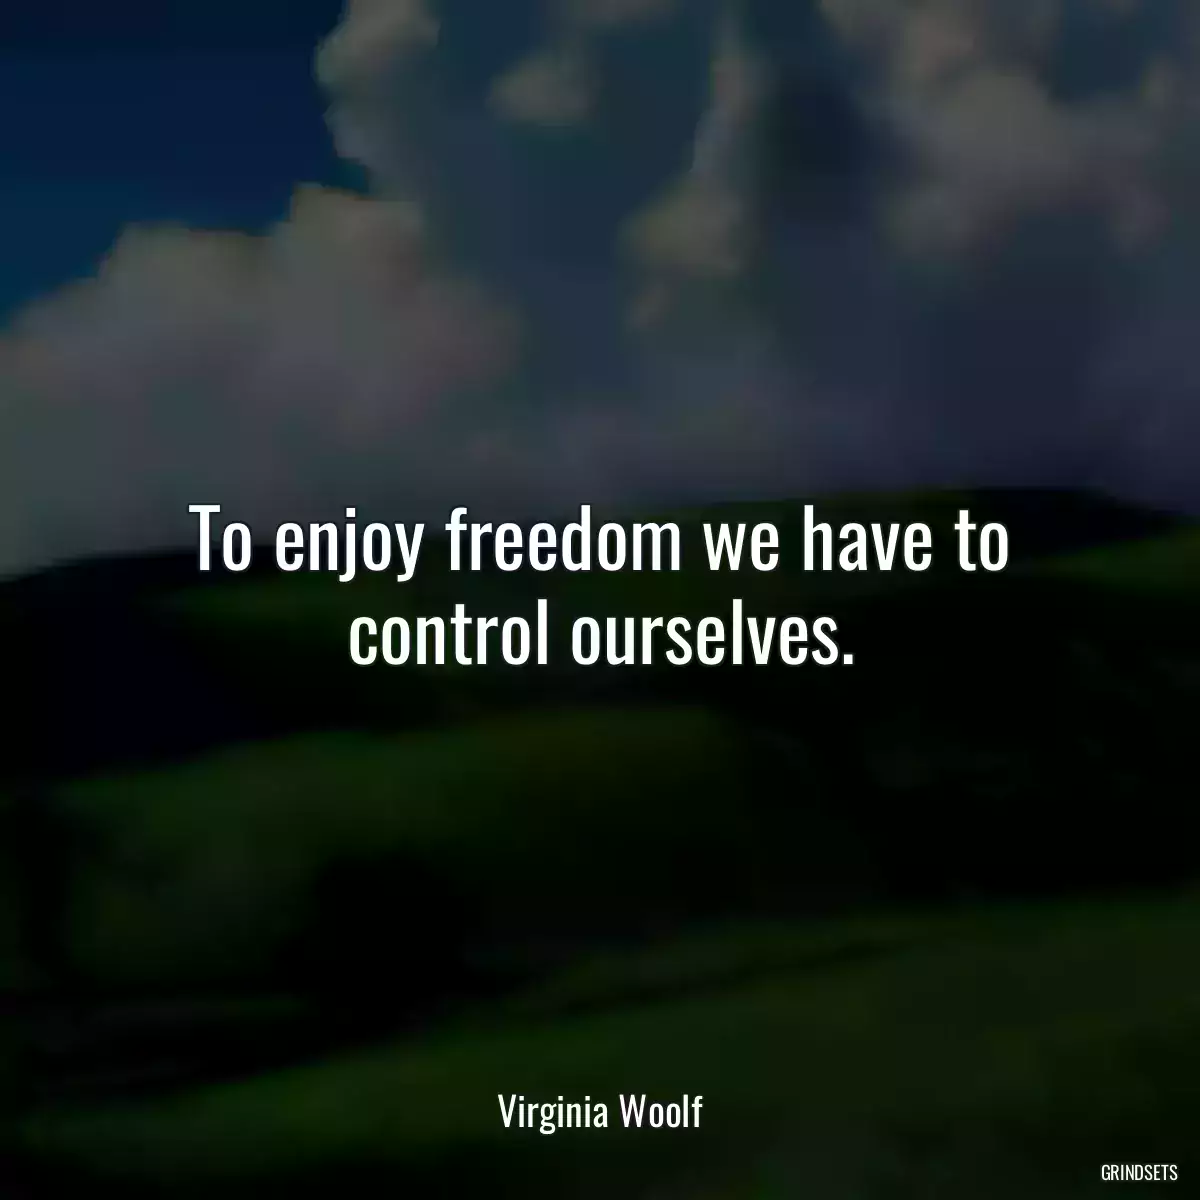 To enjoy freedom we have to control ourselves.